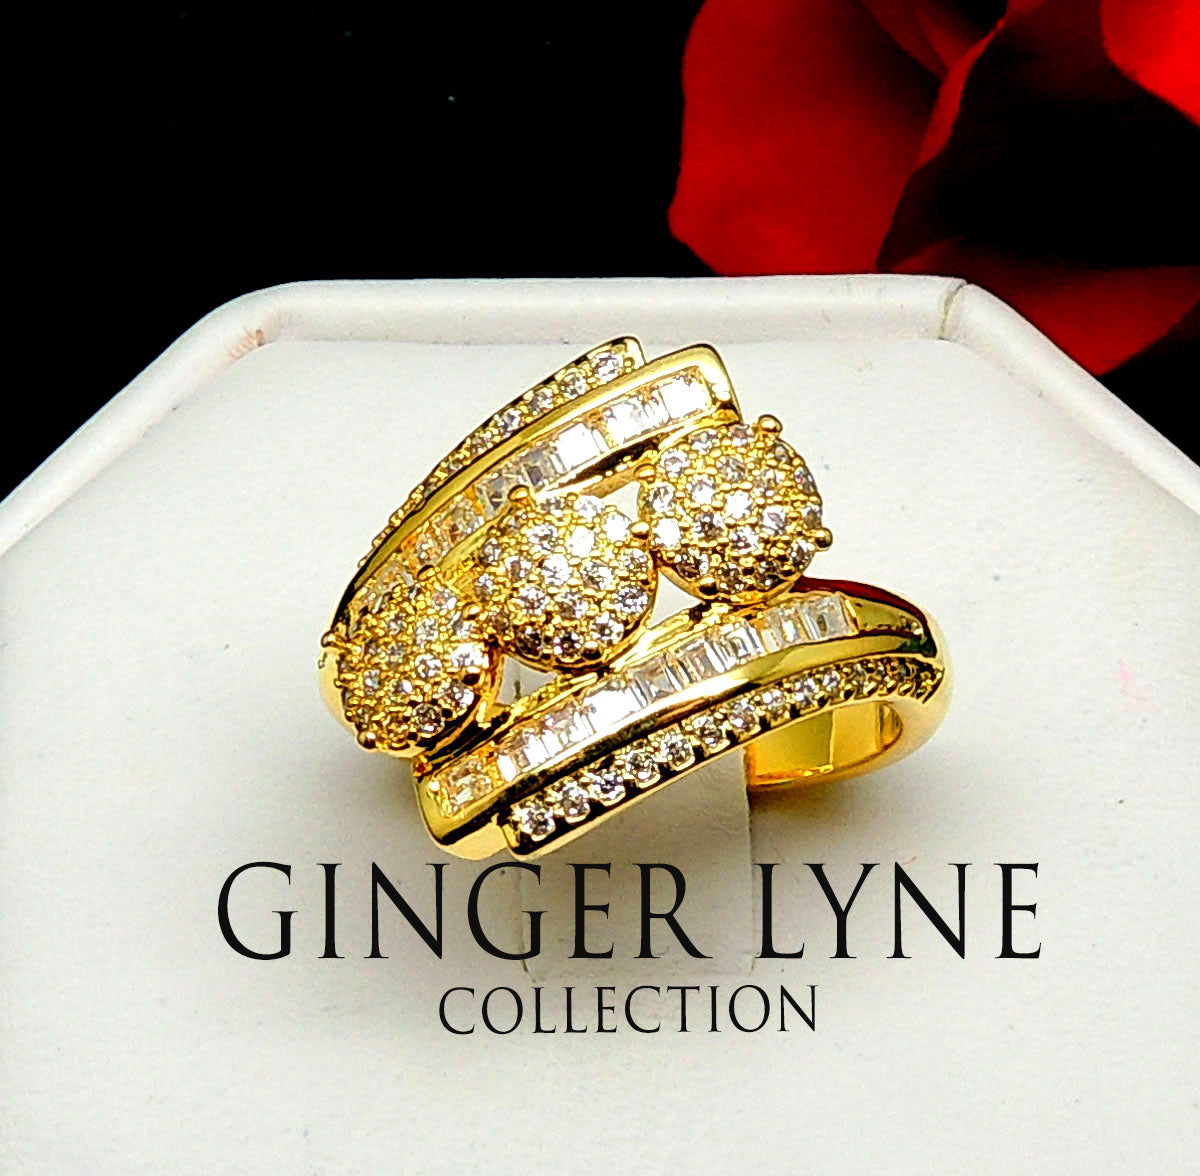 Maria Statement Engagement Bridal Ring Gold Plated Womens Ginger Lyne Collection - 10